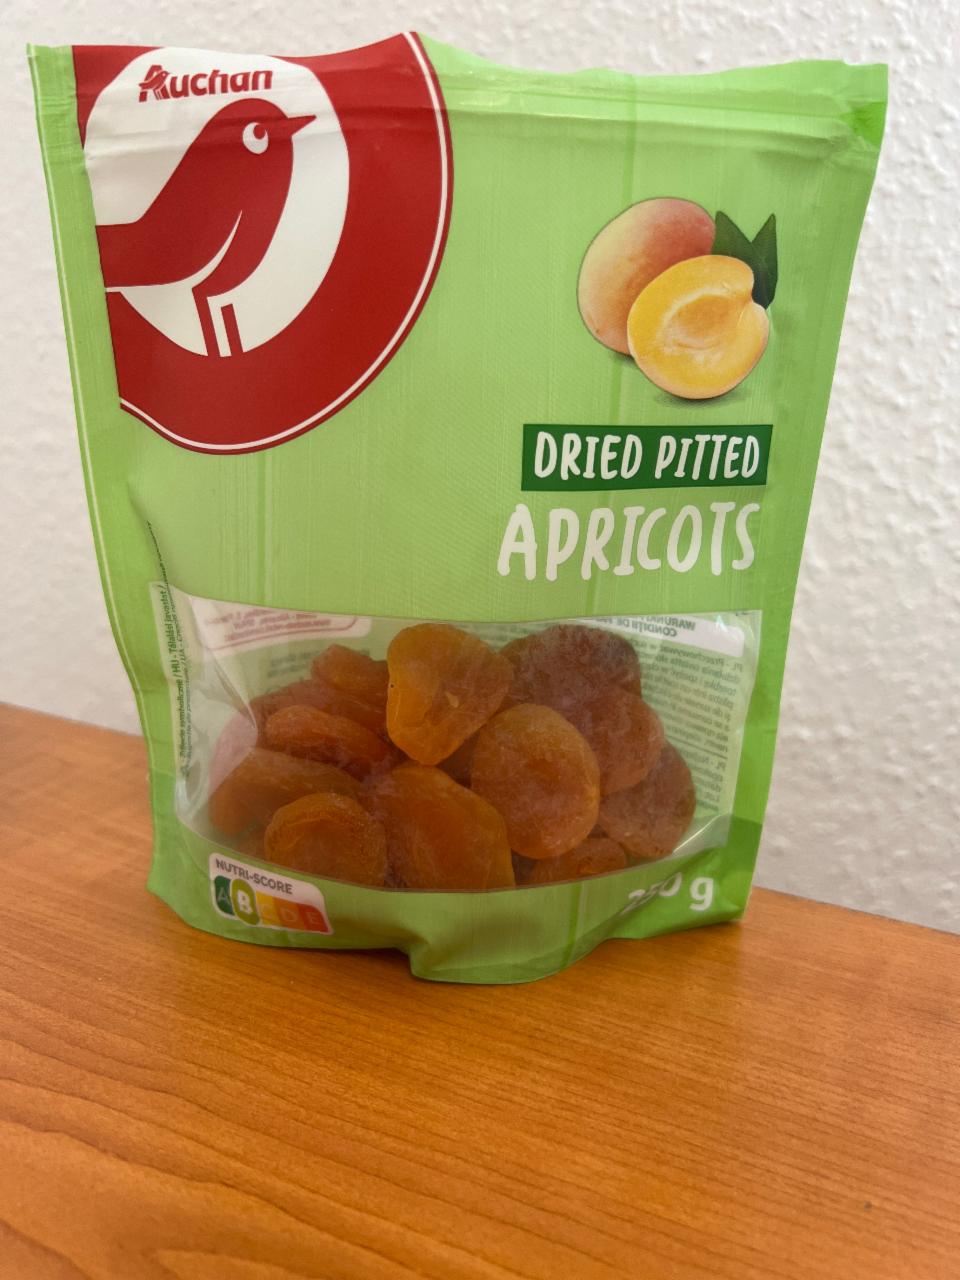 Képek - Dried pitted pricots Auchan